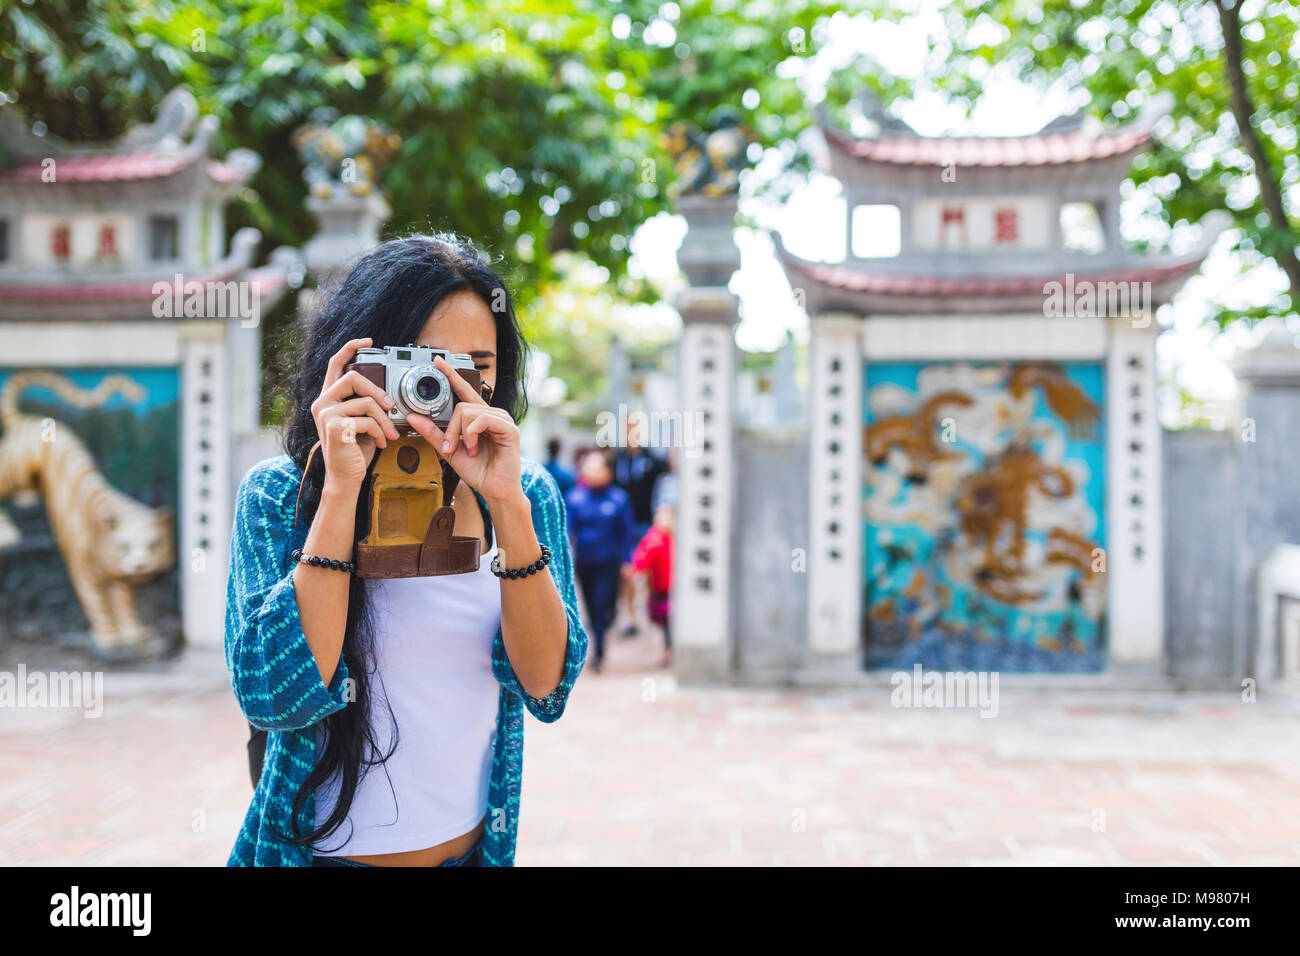 Vietnam, Hanoi, young woman taking a picture with old-fashioned camera Stock Photo